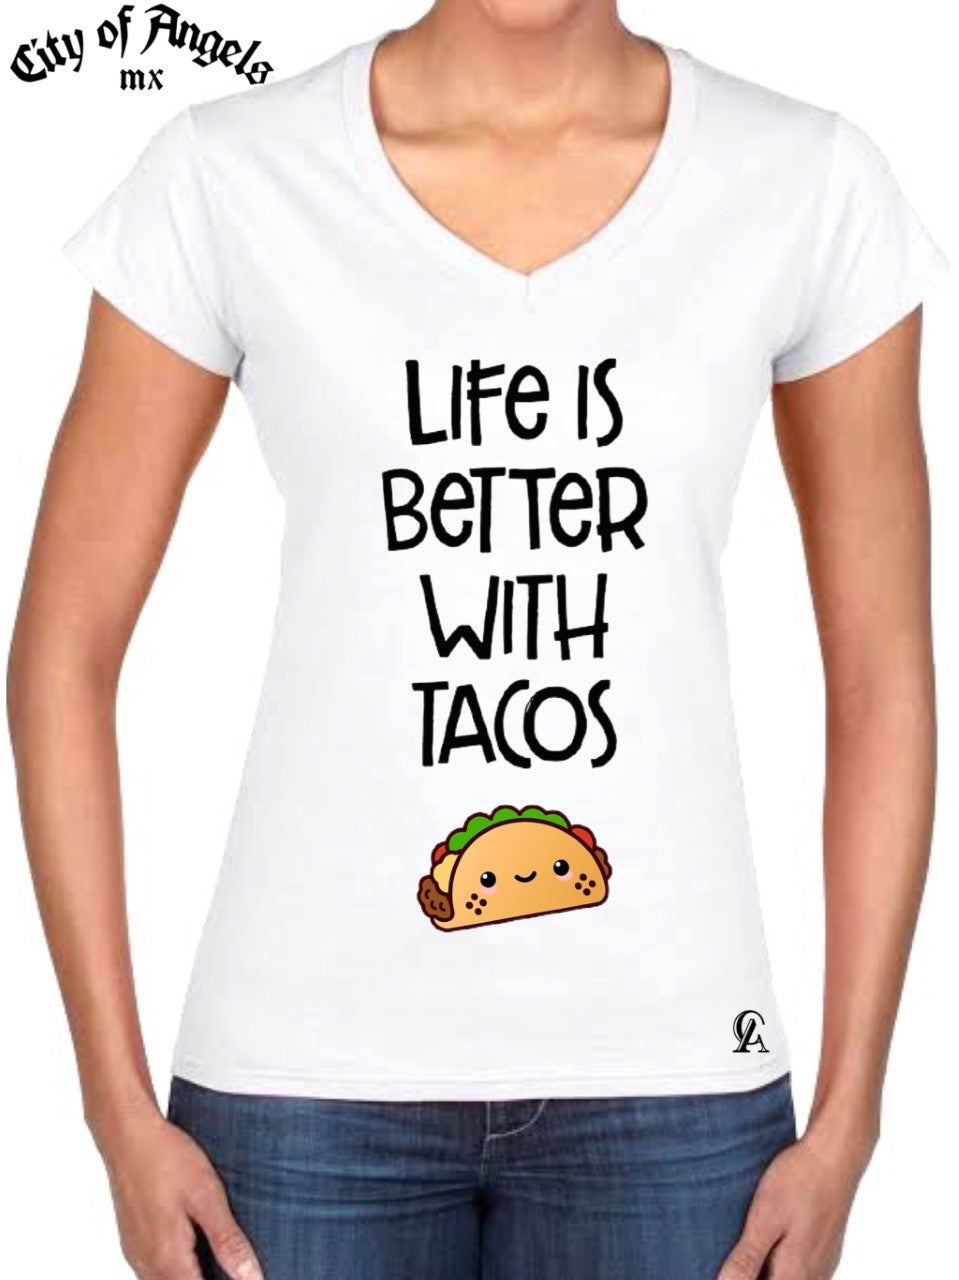 City Of Angels MX® - LIFE IS BETTER WITH TACOS - T SHIRT